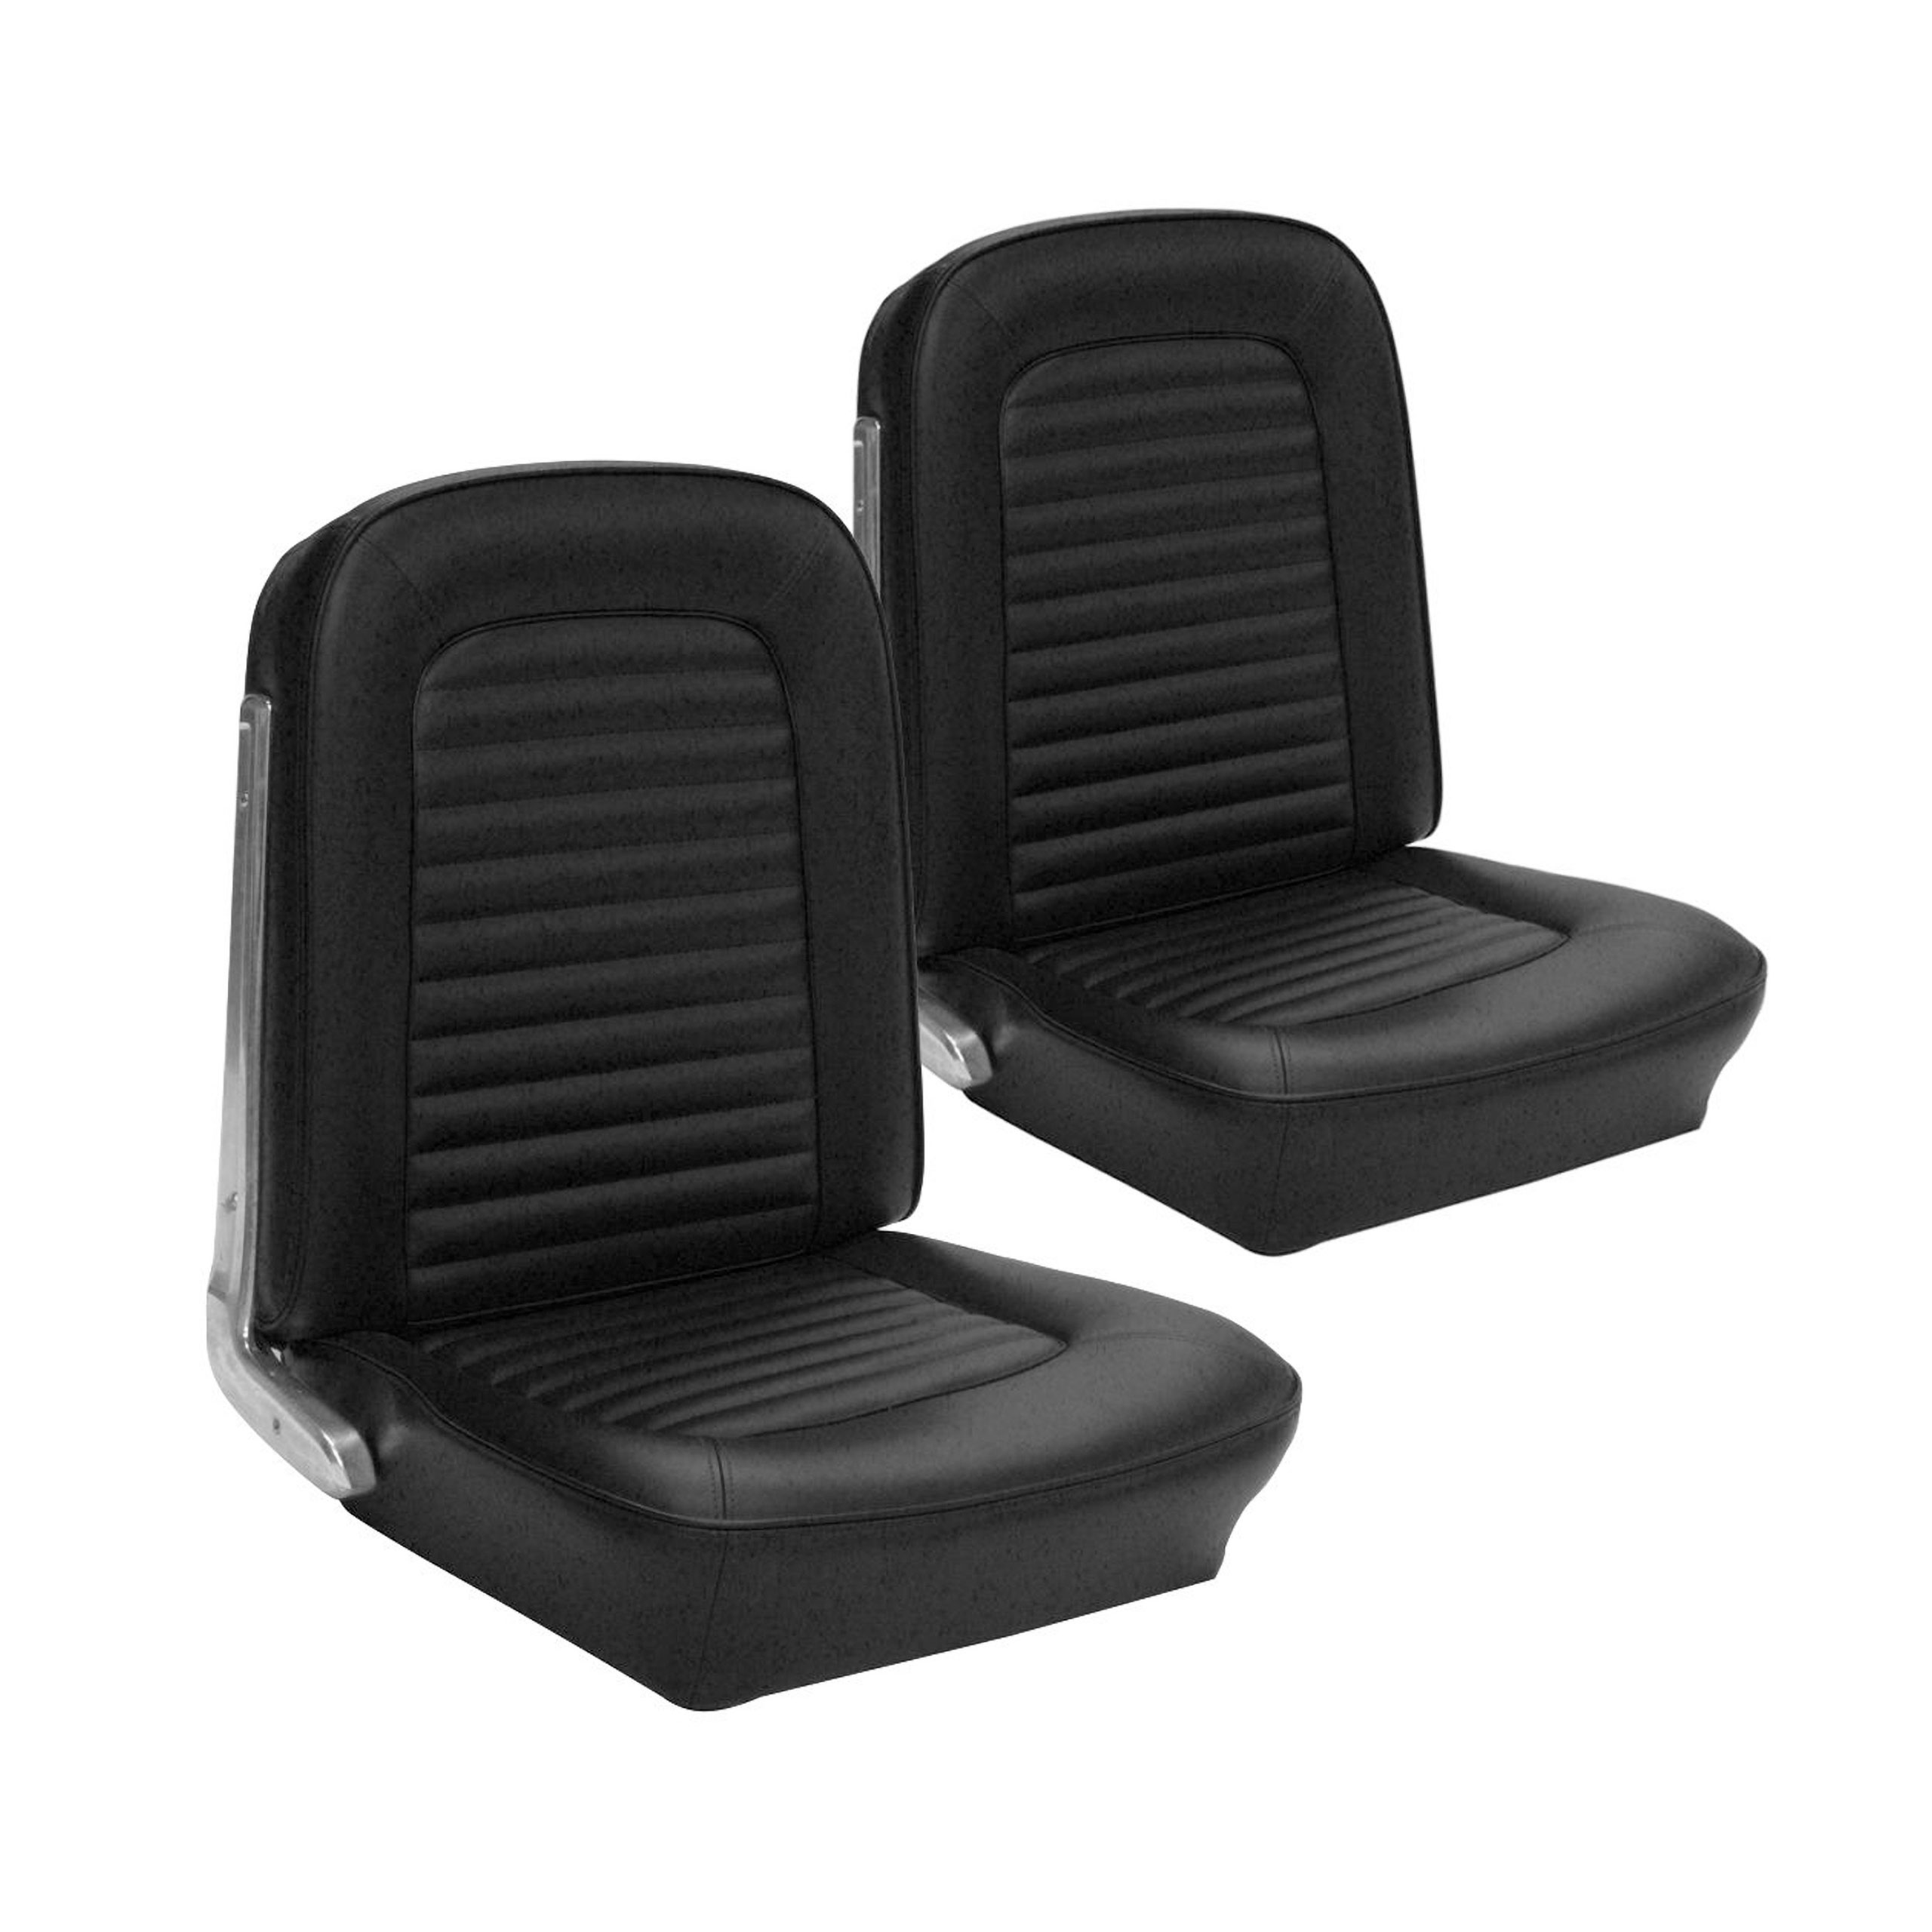 First Generation 1966 Ford Mustang Standard Front Buckets & Rear Seat Cover Set - Choose Application & Color - TMI Products